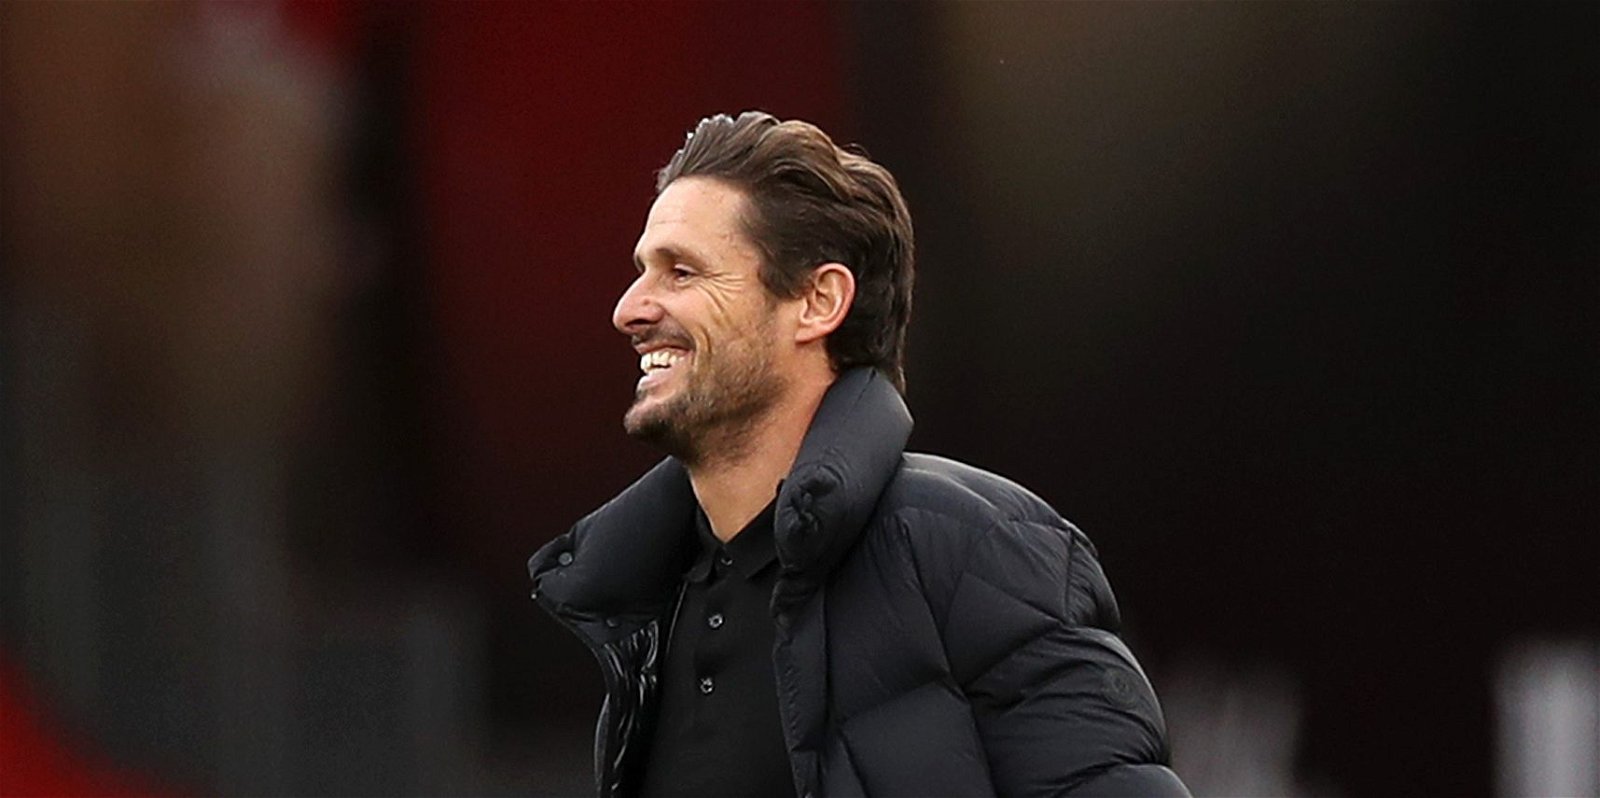 , Kris Temple sheds light on Bournemouth&#8217;s next move &#8211; Woodgate, Purches, and &#8216;timescale&#8217; for finding Jason Tindall&#8217;s successor